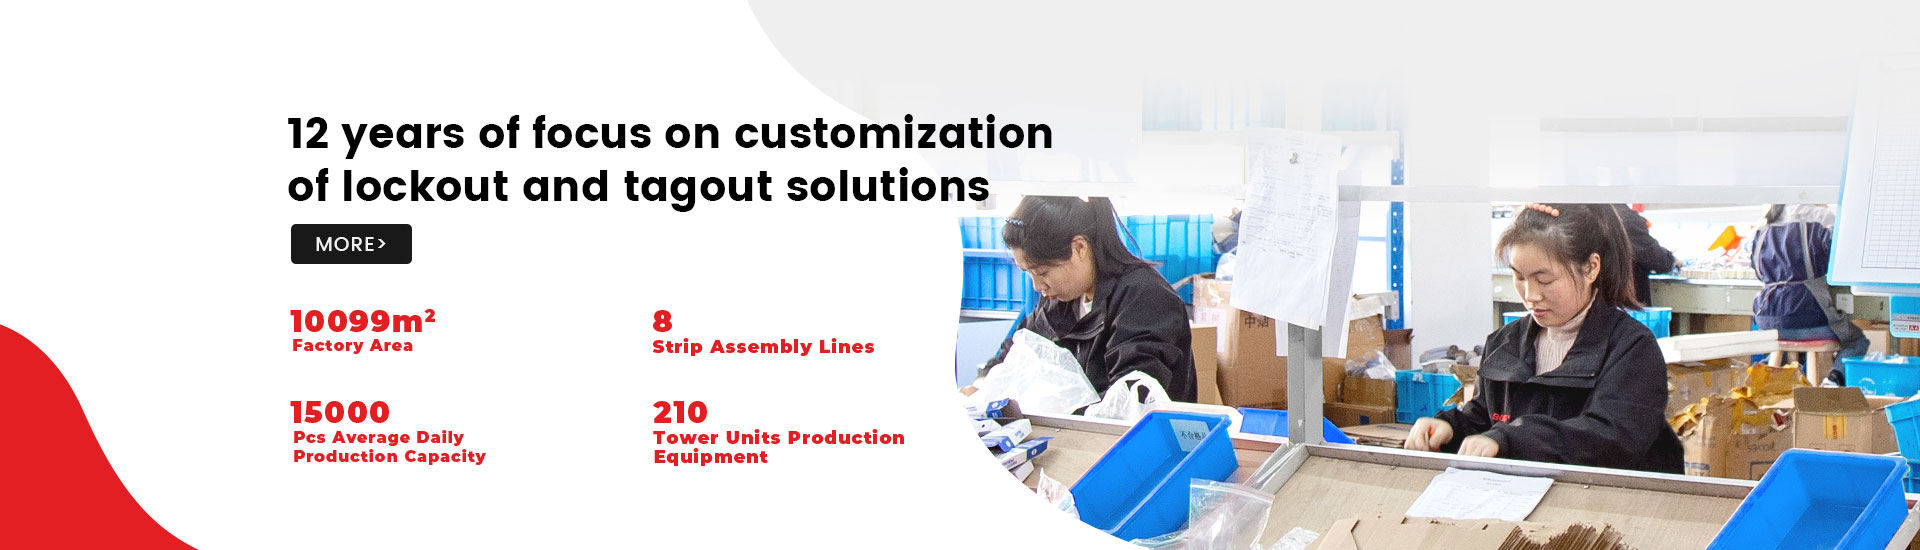 12 years of focus on customization of lockout and tagout solutions